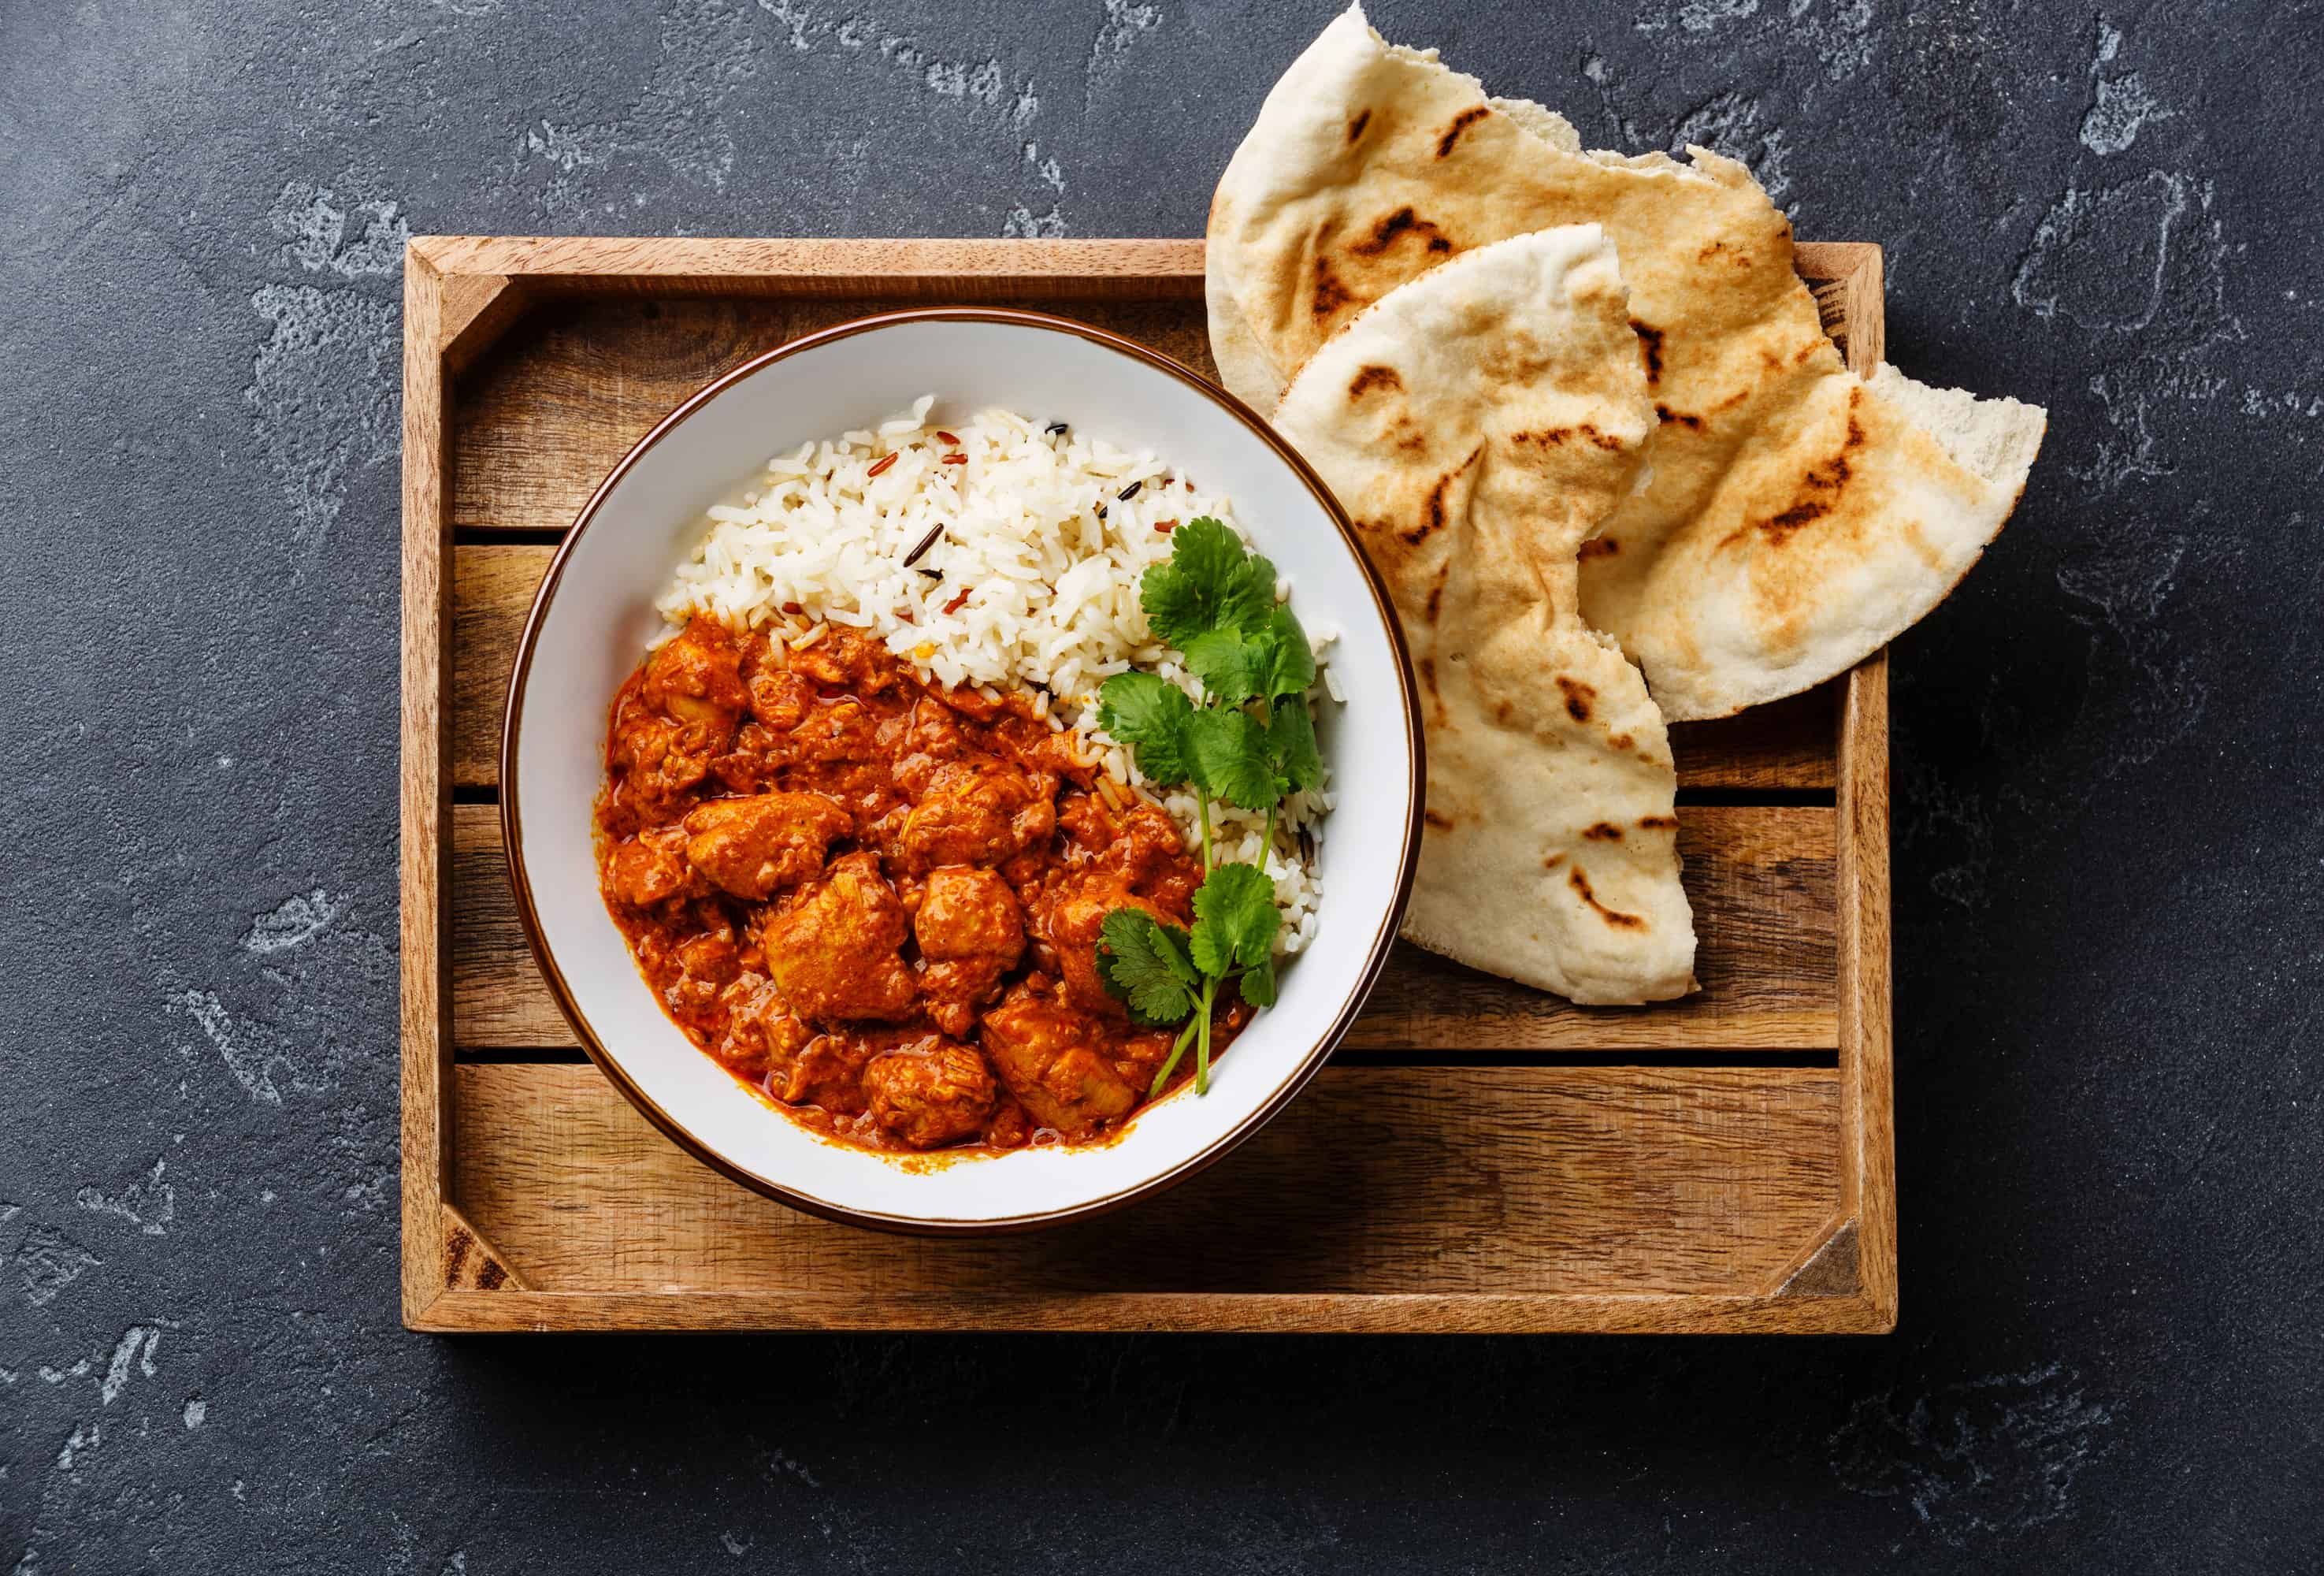 bowl of rice and chicken tikka masala on wooden tray with naan bread